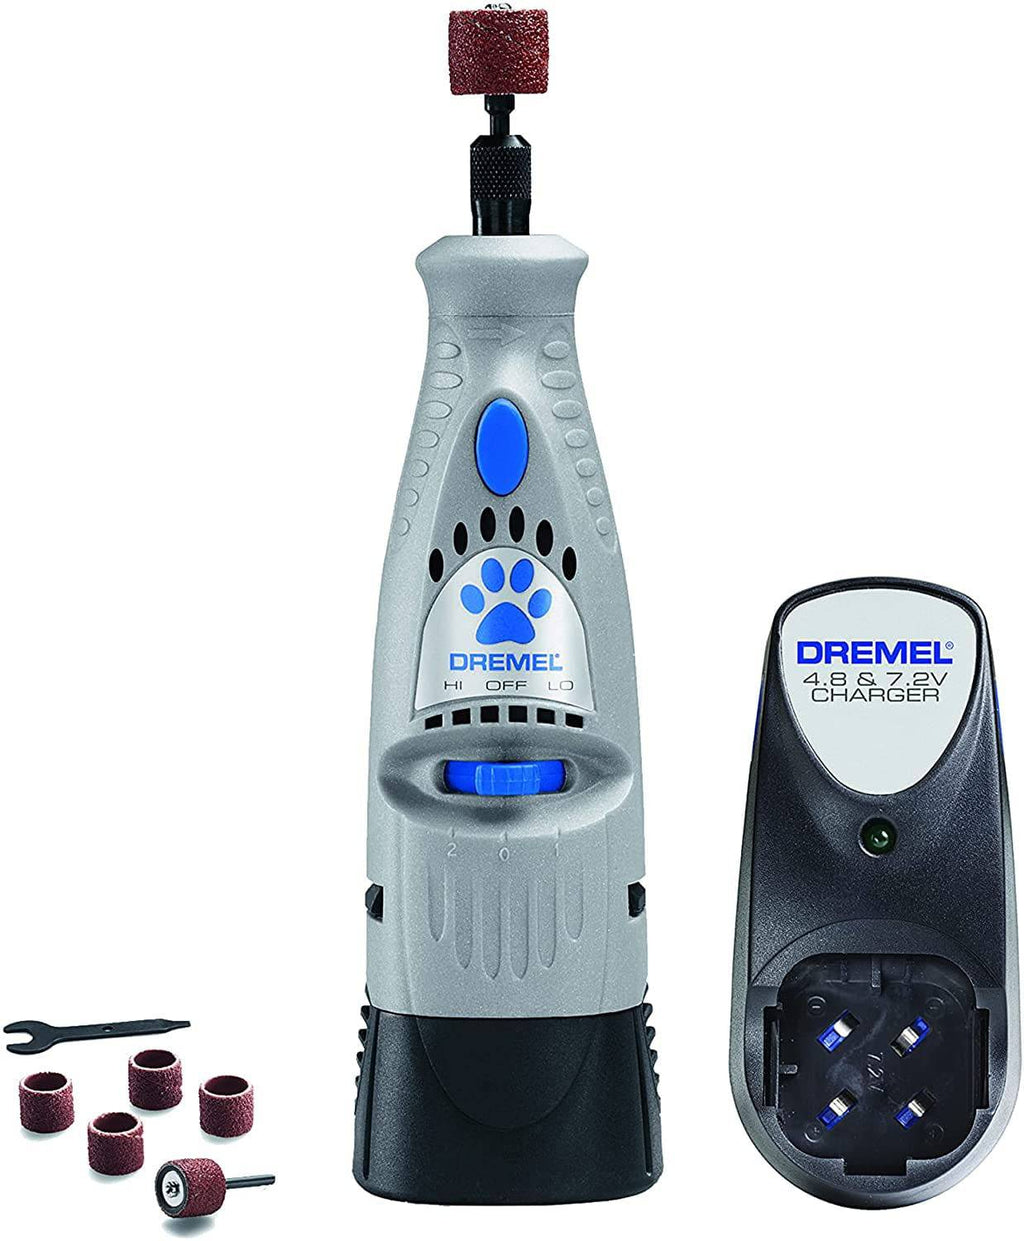 Dremel 7300-PT 4.8V Cordless Pet Dog Nail Grooming & Grinding Tool - Felicitails is founded by Lindsay Giguiere